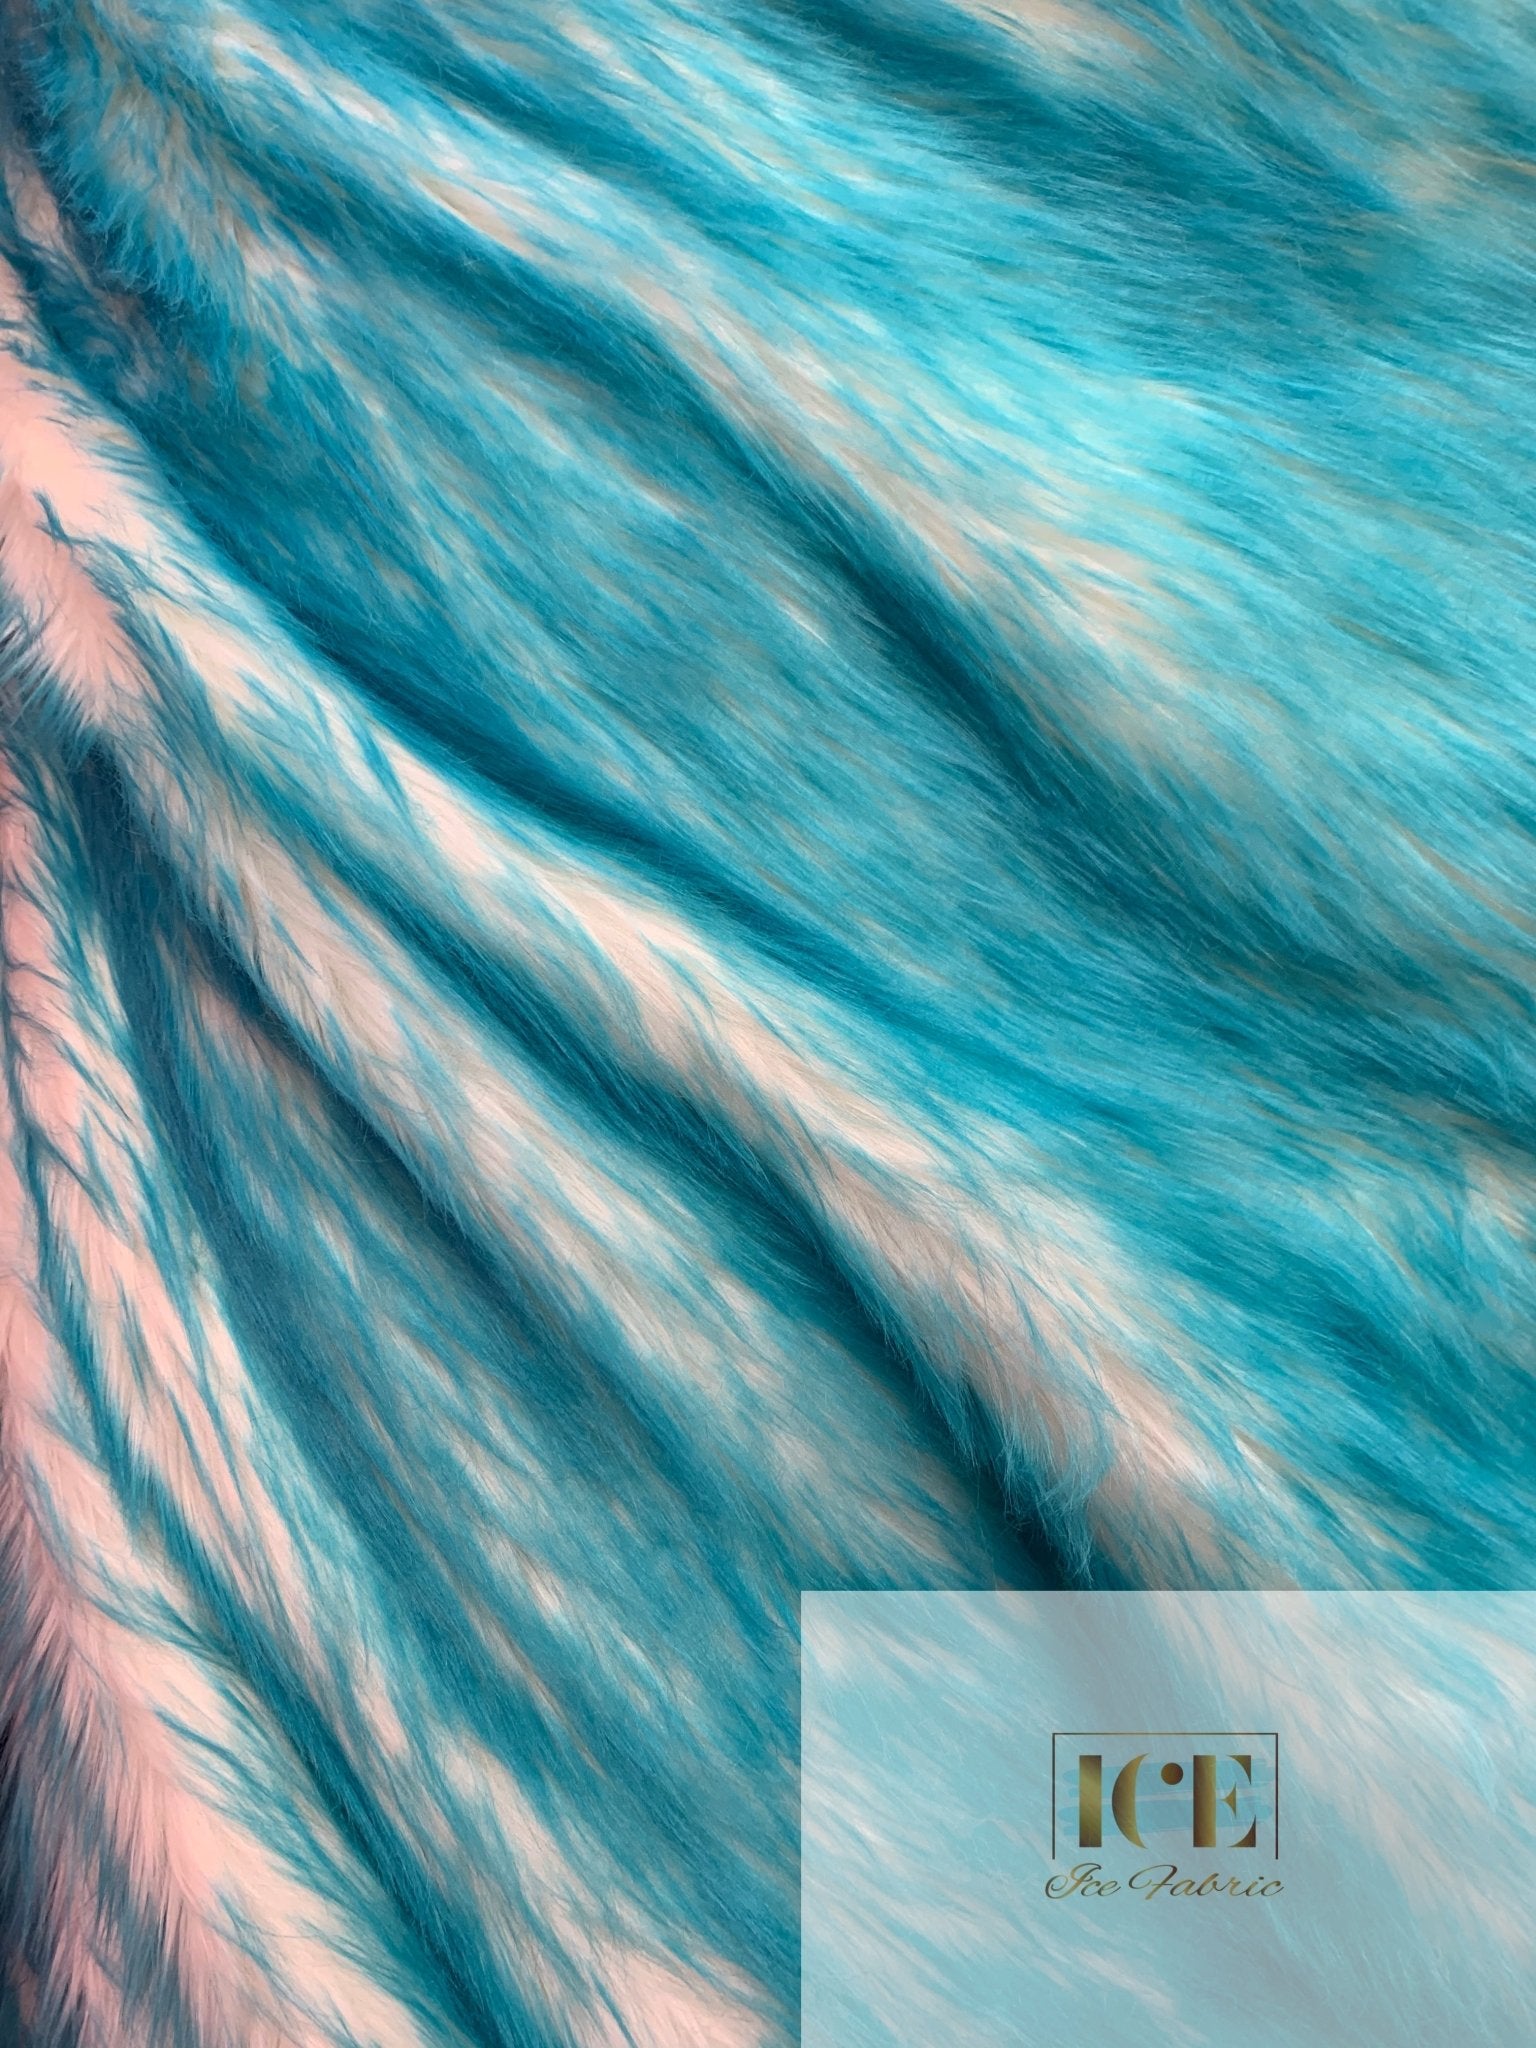 Canadian Fox 2 Tone Shaggy Long Pile Faux Fur Fabric For Blankets, Costumes, Bed SpreadICEFABRICICE FABRICSTurquoiseBy The Yard (60 inches Wide)Canadian Fox 2 Tone Shaggy Long Pile Faux Fur Fabric For Blankets, Costumes, Bed Spread ICEFABRIC Turquoise